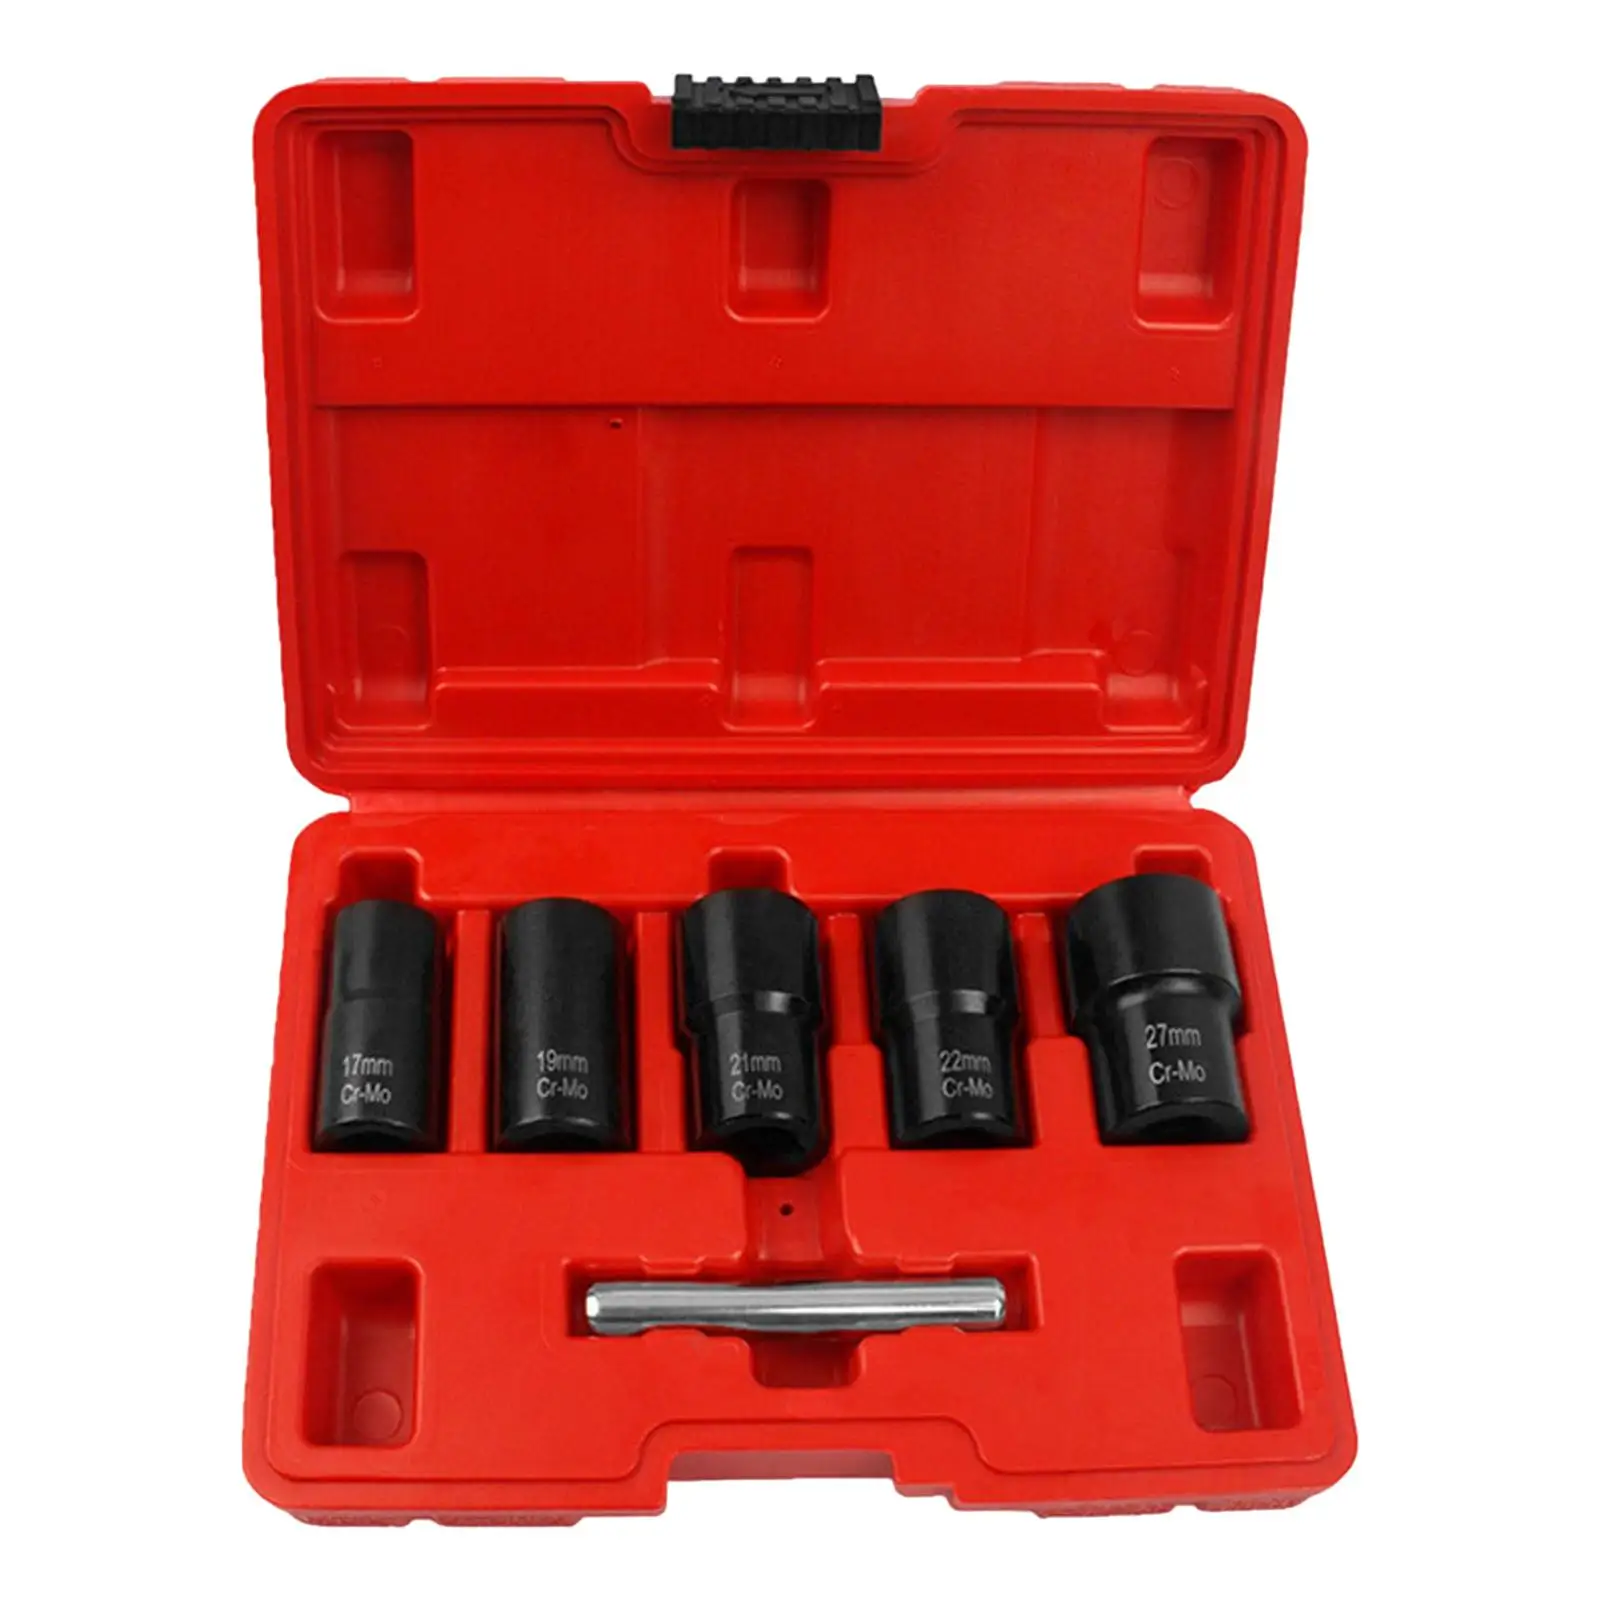 6x Socket Wrench Set with Storage Case Broken Screw Extractor Remover Set 6 Point for 1/2